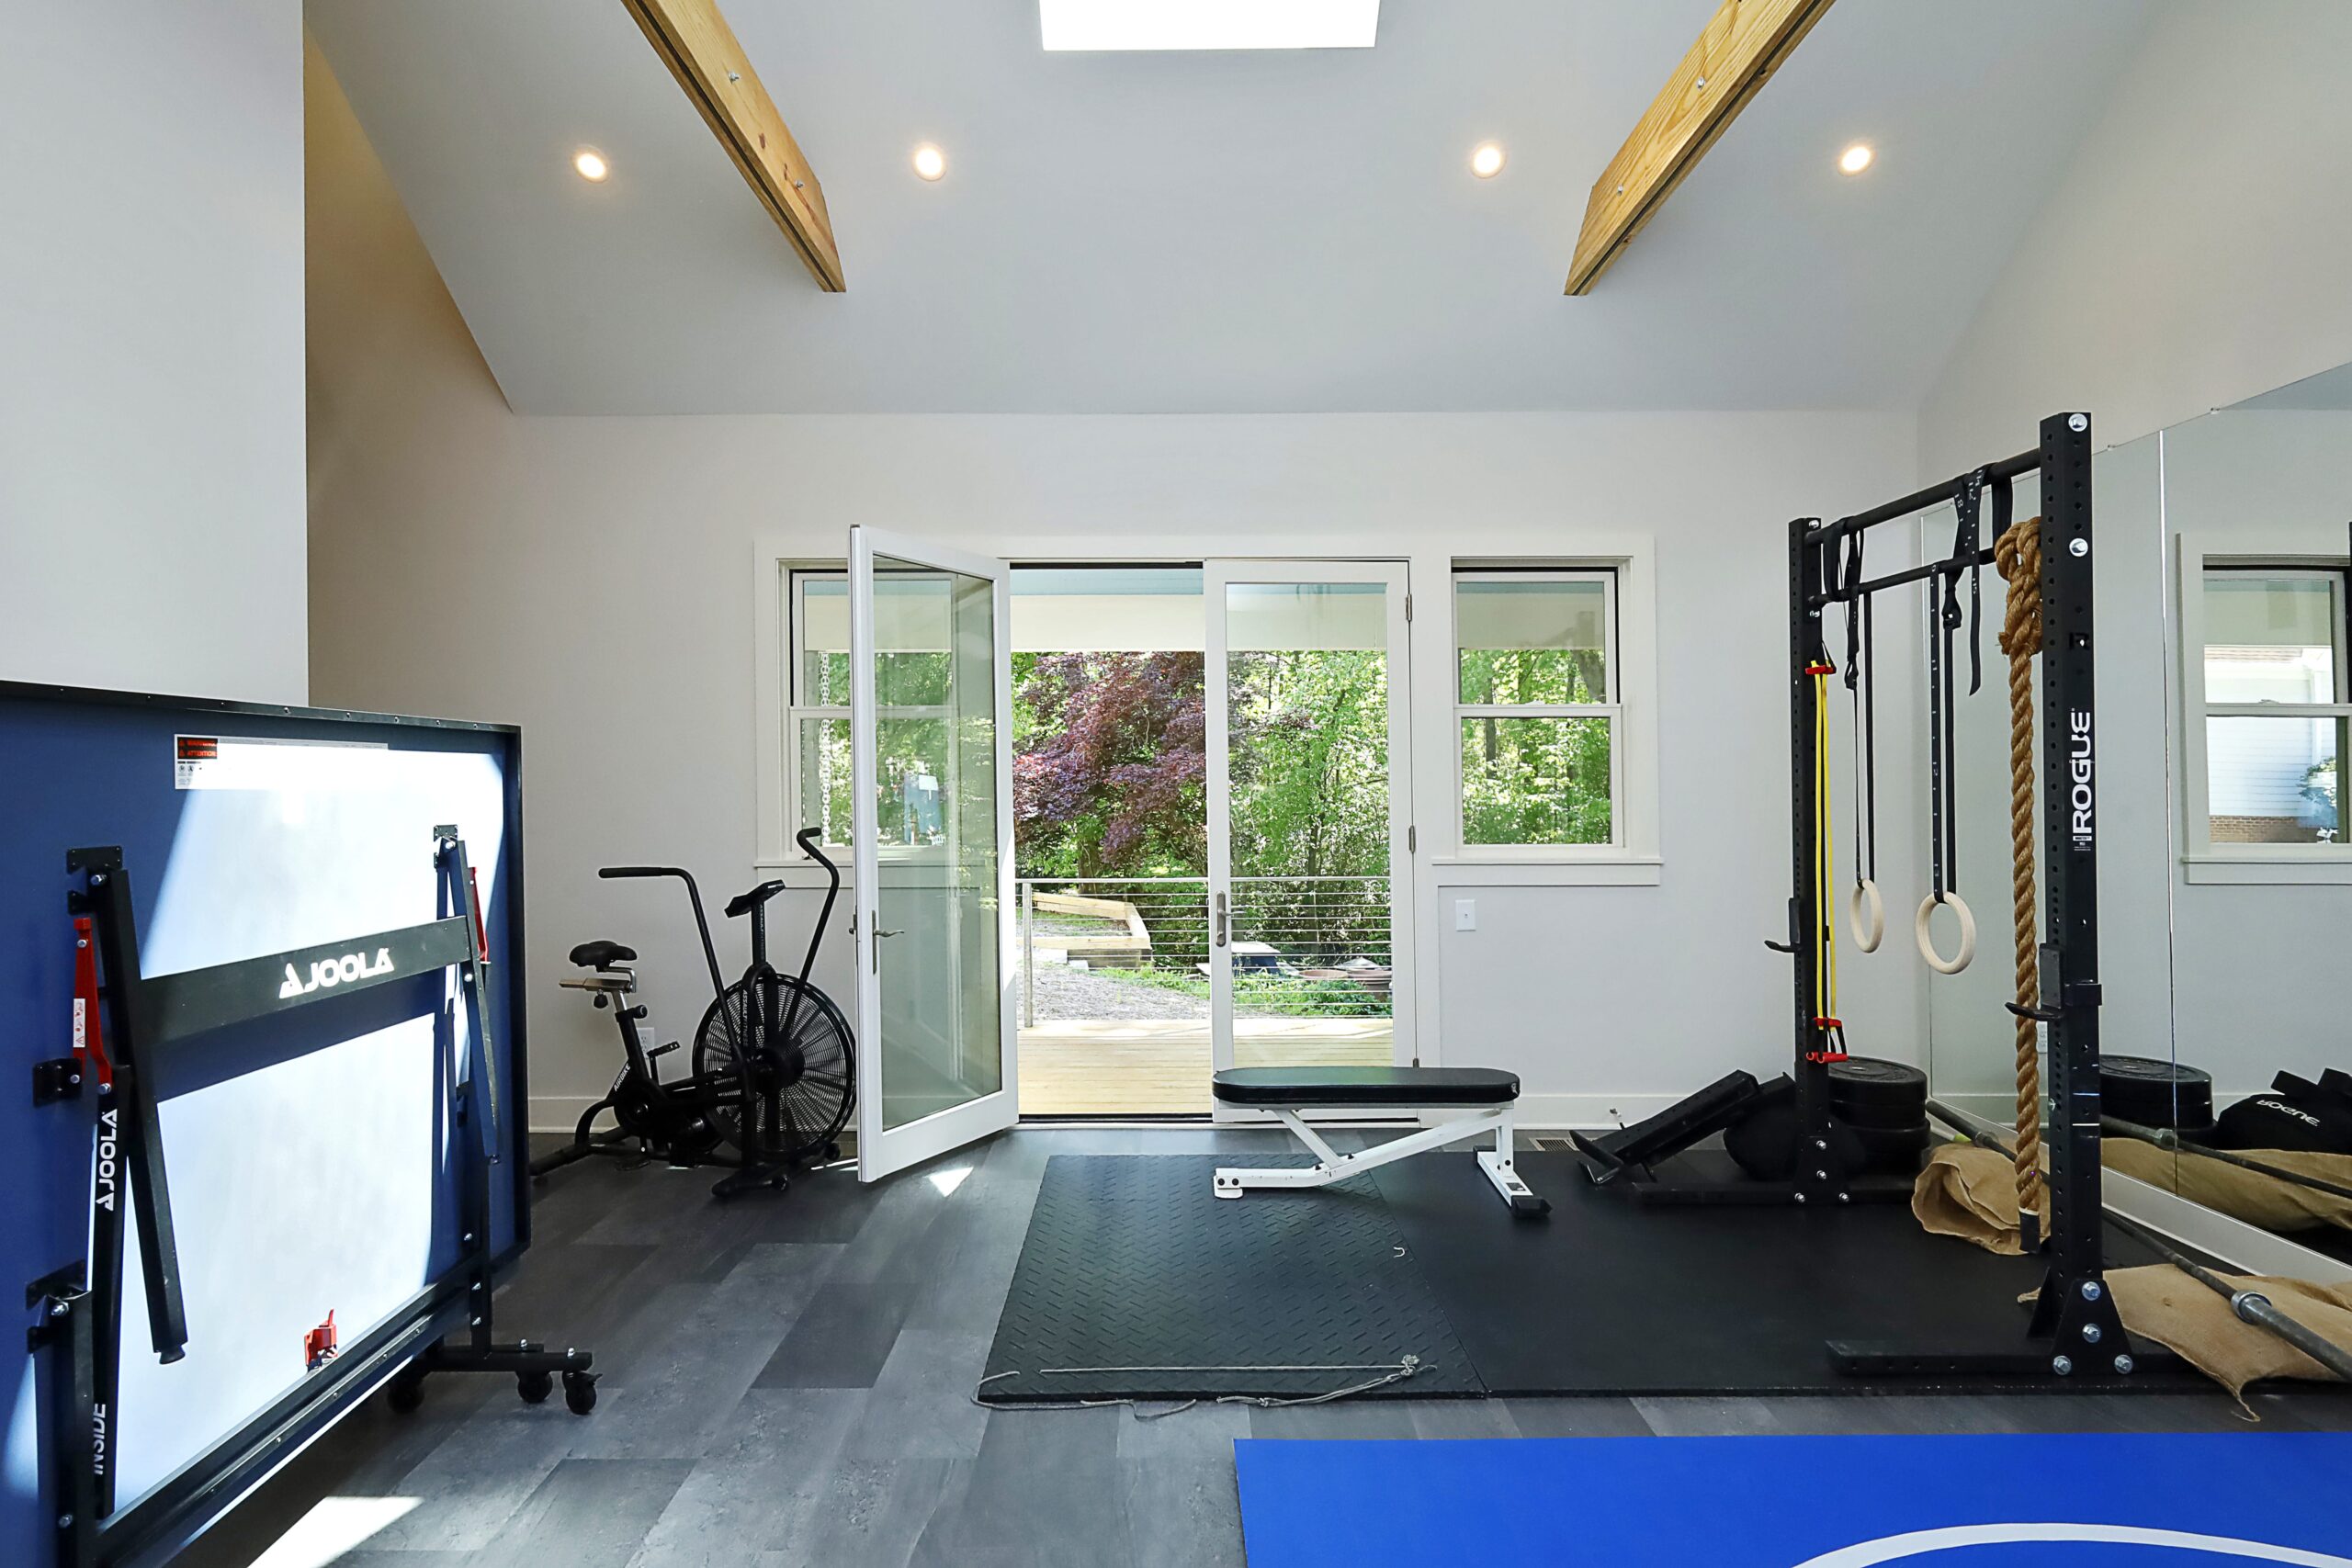 A view of the home gym looking out towards the covered porch. Tall glass double-doors connect the two spaces.